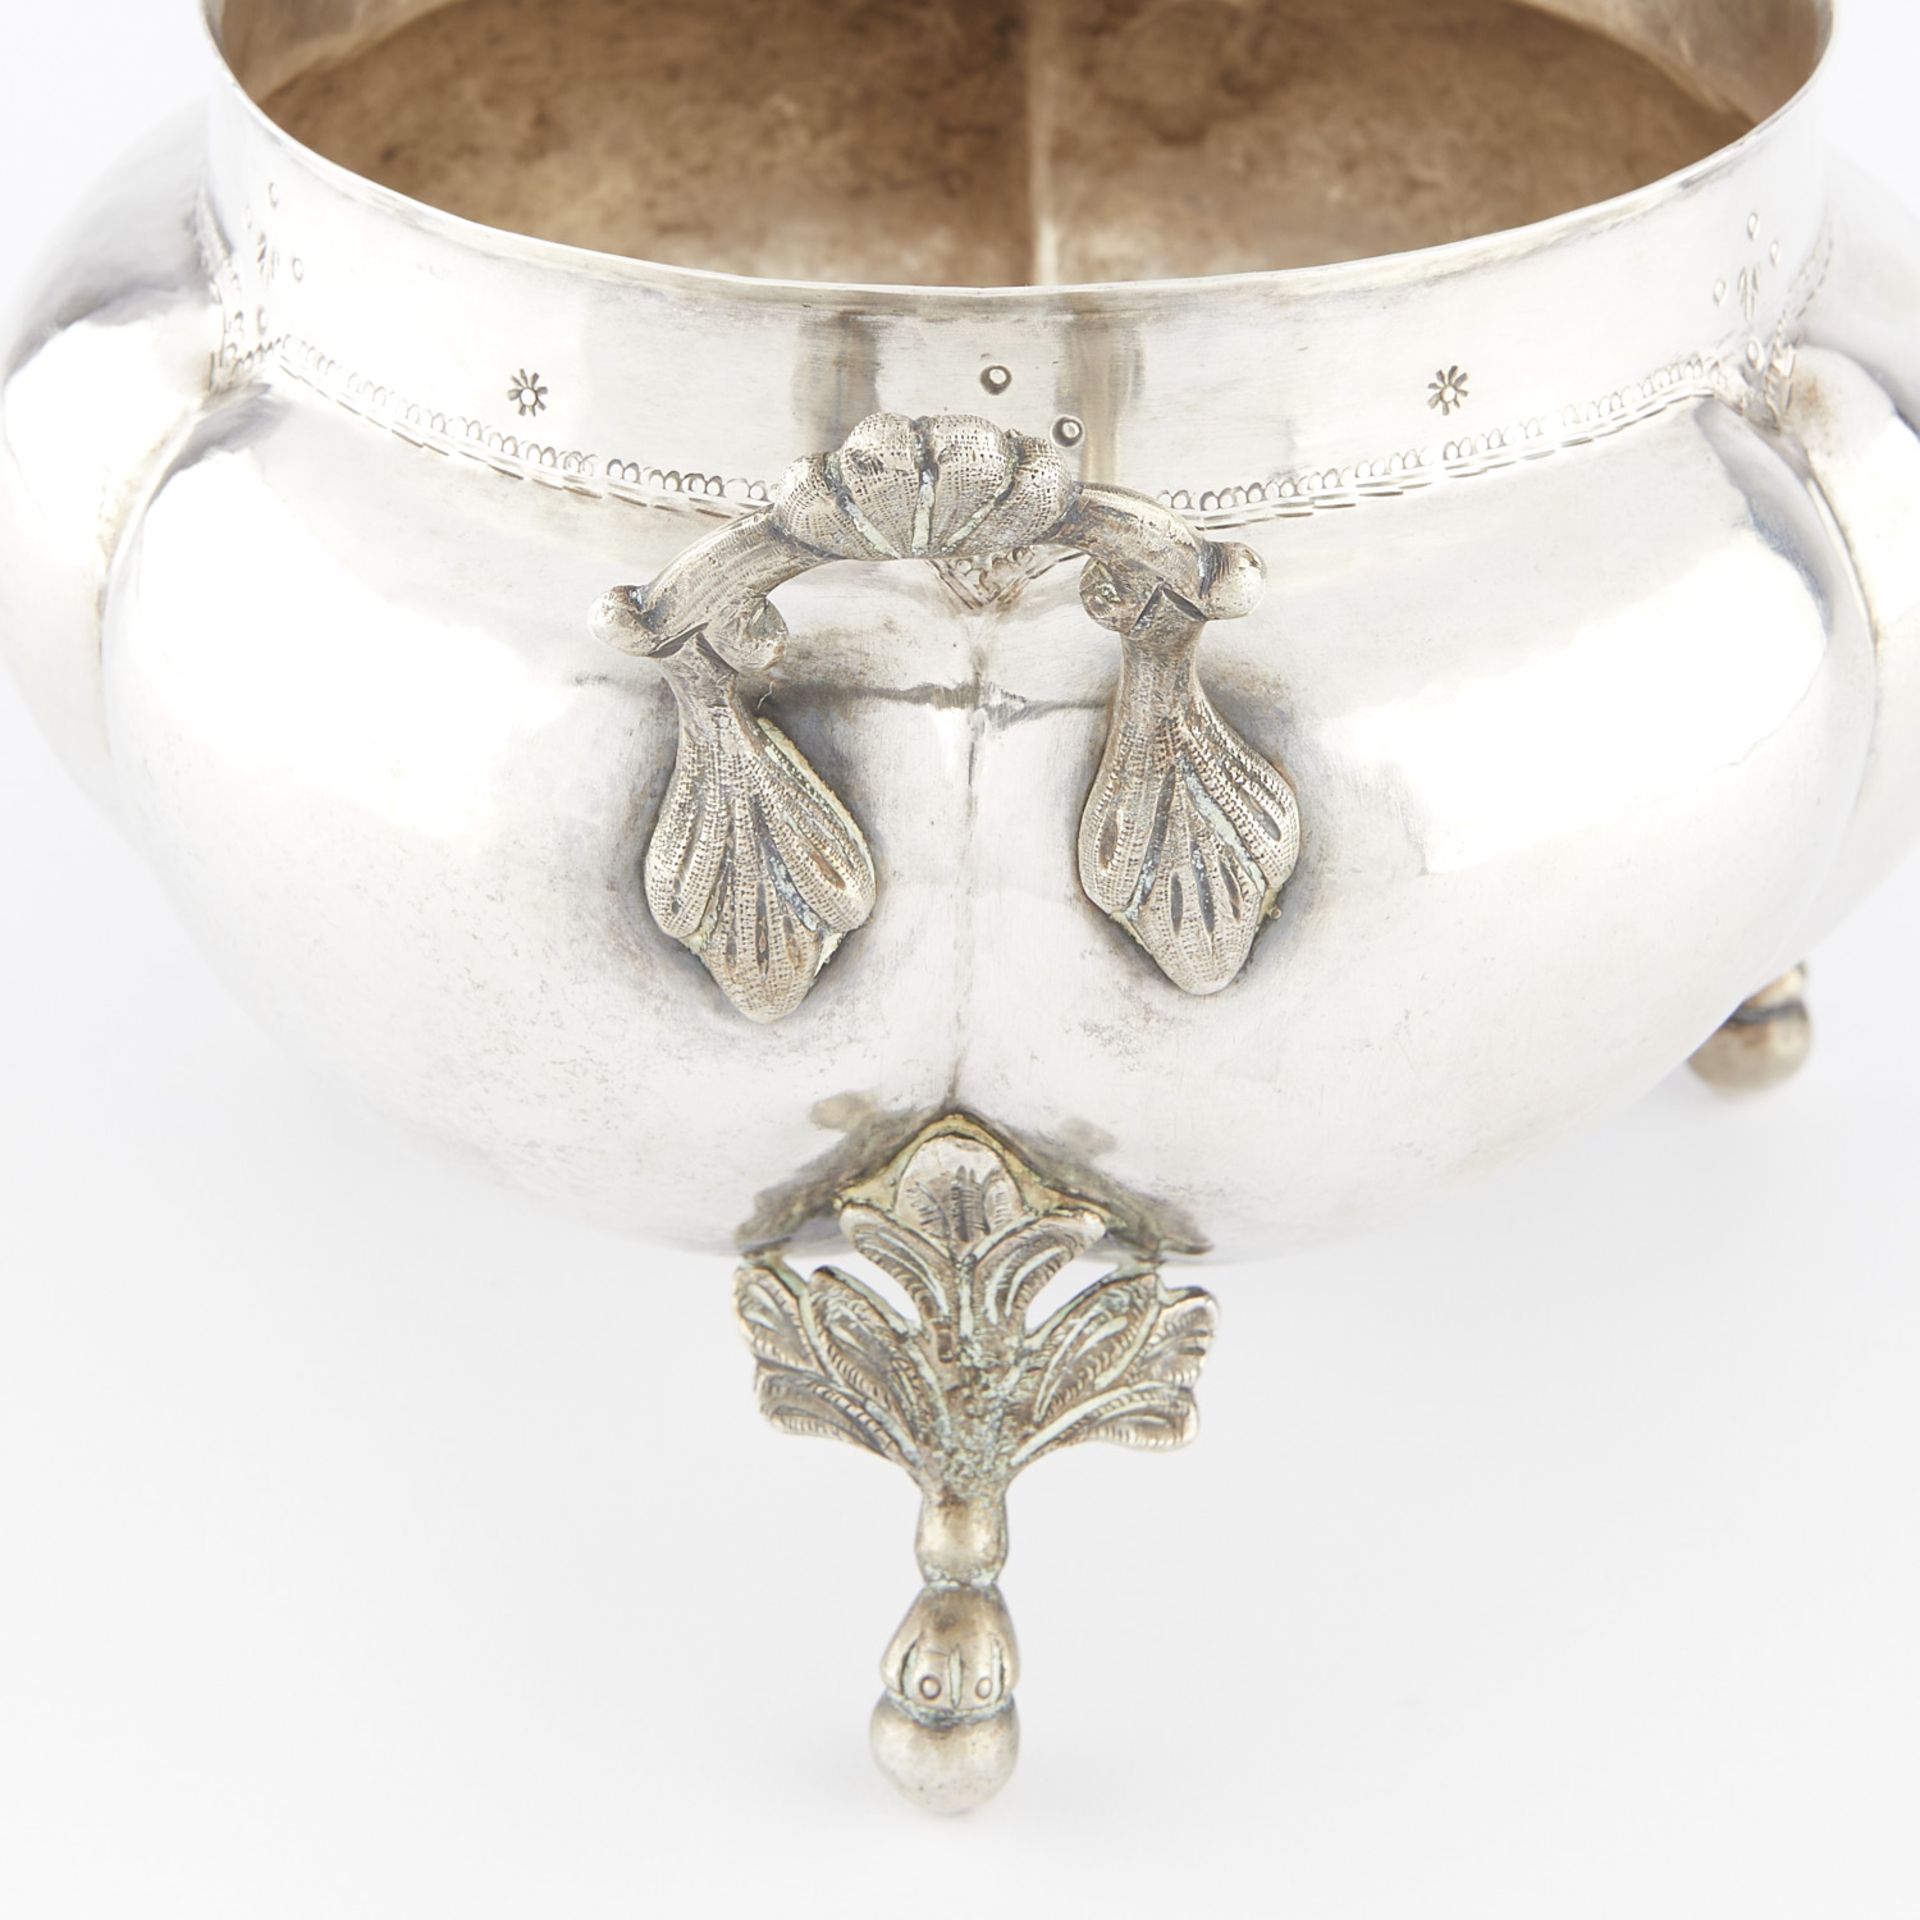 18th/19th c. Antique Silver Lobed Bowl - Image 2 of 9